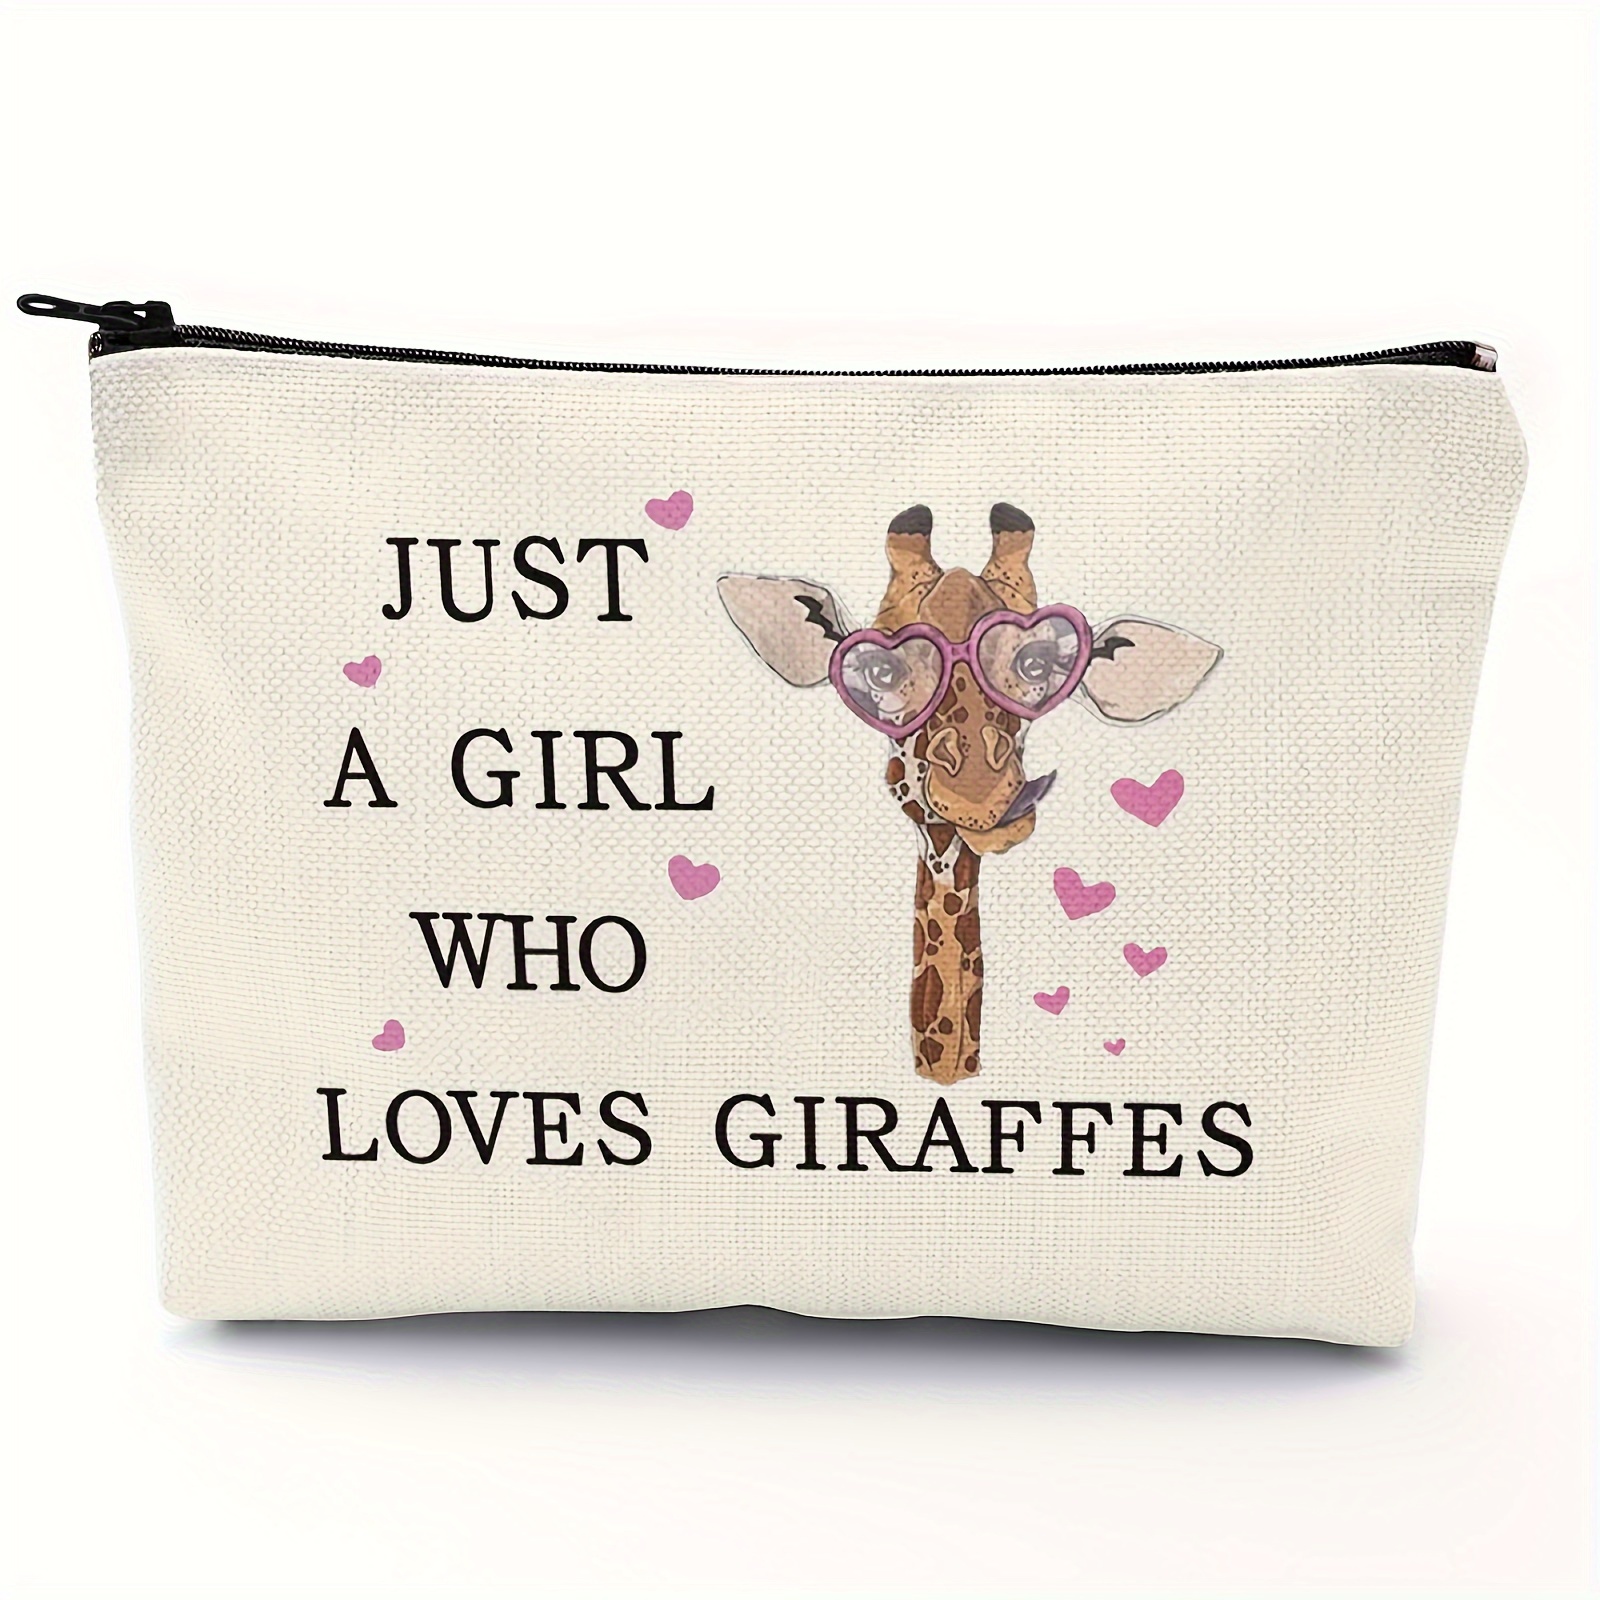 

Funny Giraffe Makeup Bag Zipper Pouch, Polyester Cosmetic Travel Bag, Toiletry Case Multi Functional Pouch Gifts For Friends